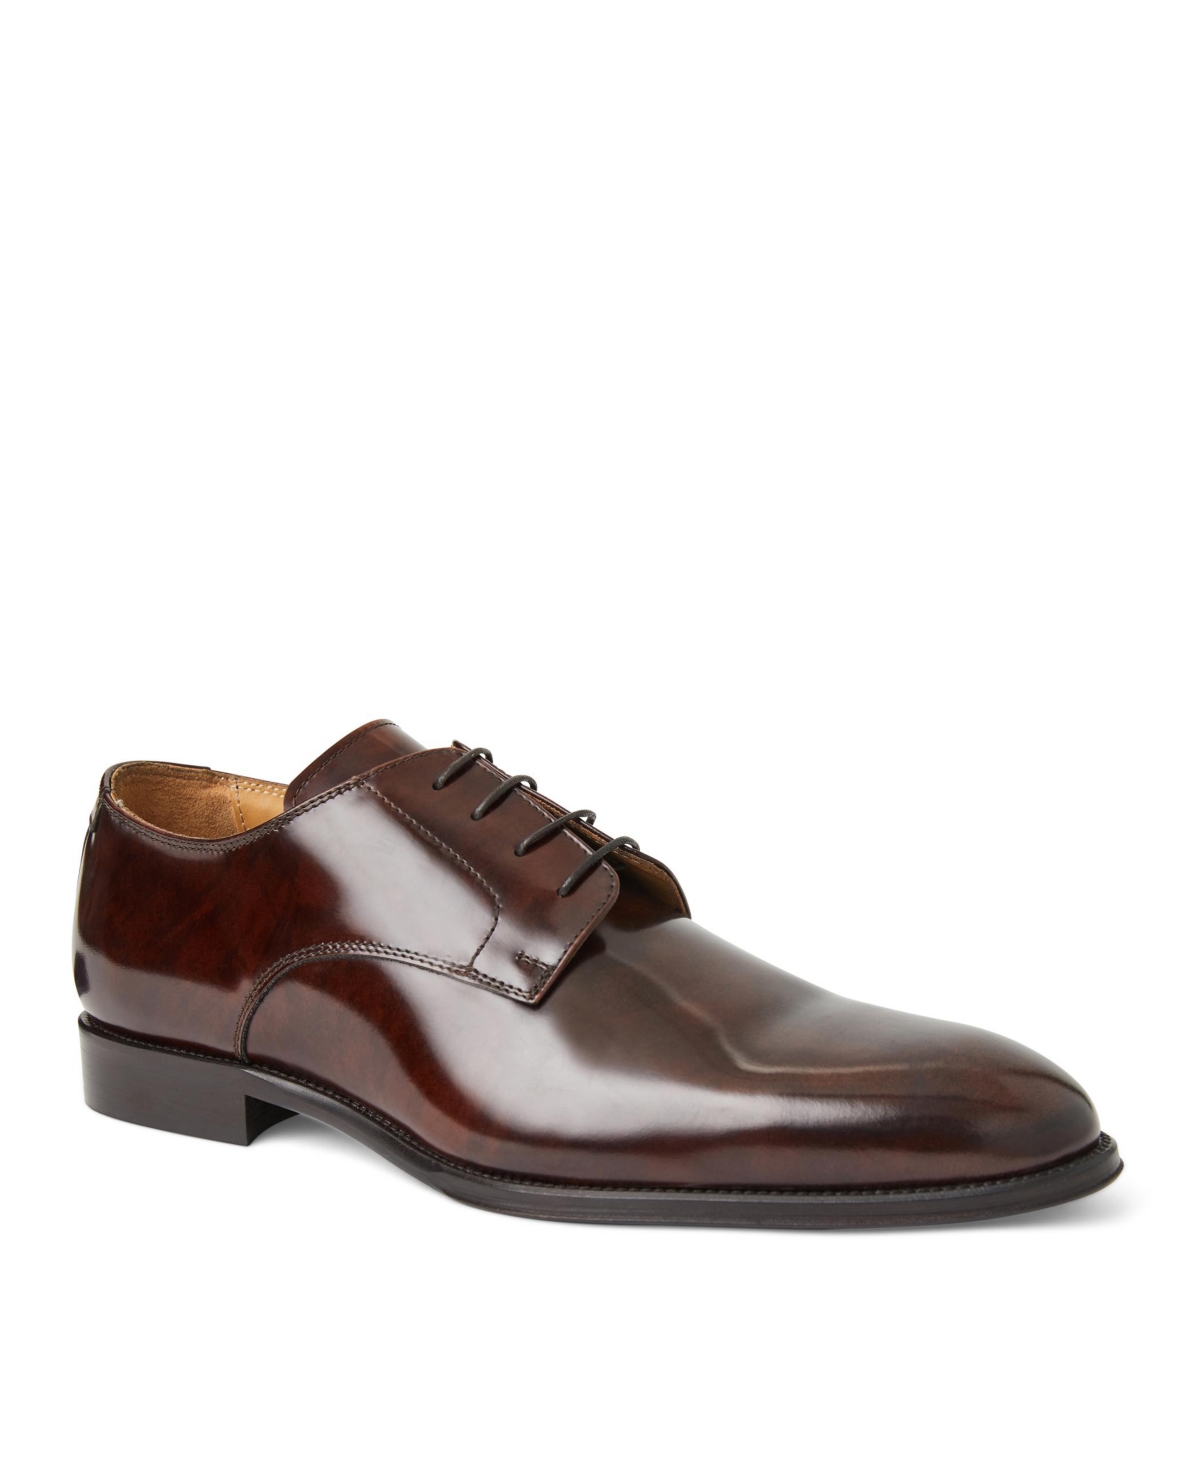 Men's Asti Lace-Up Shoes - Brown